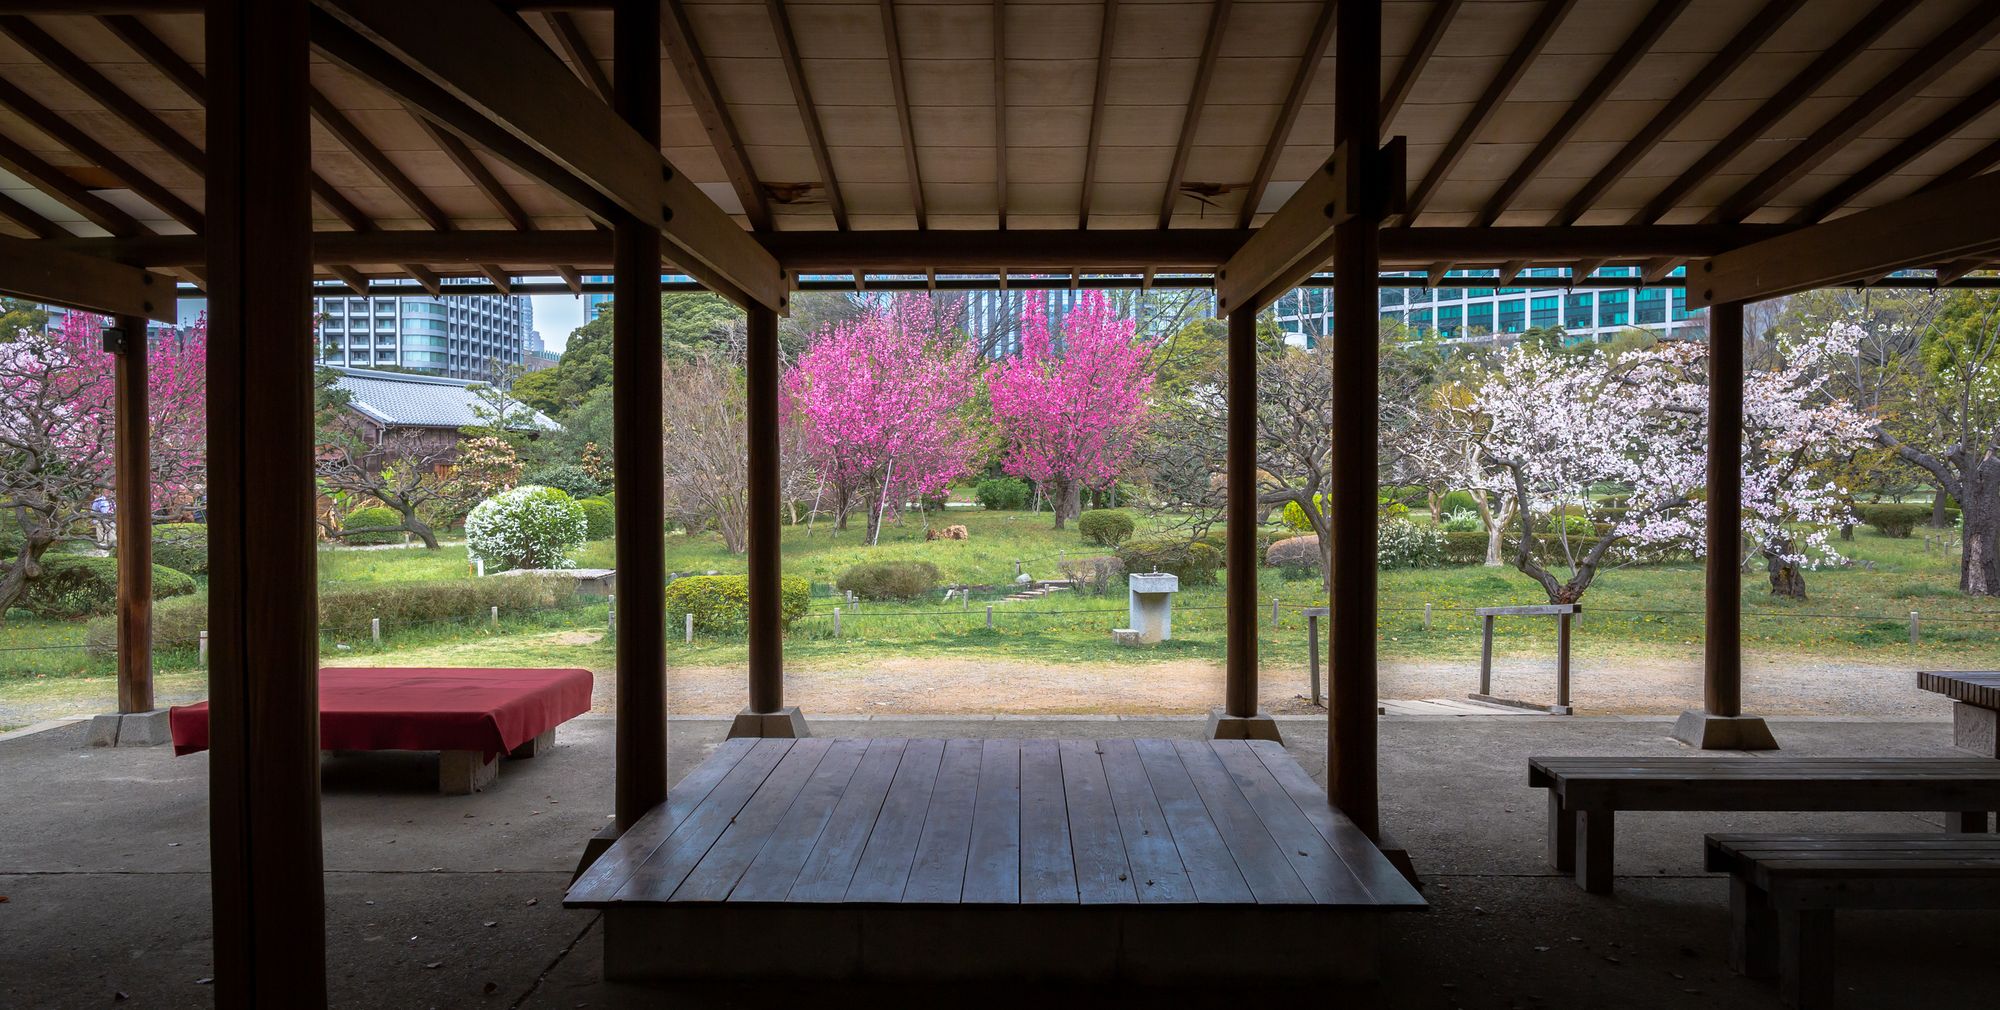 Looking out from a covered pavillion at blossoming plum and cherry trees in a Japanese garden.